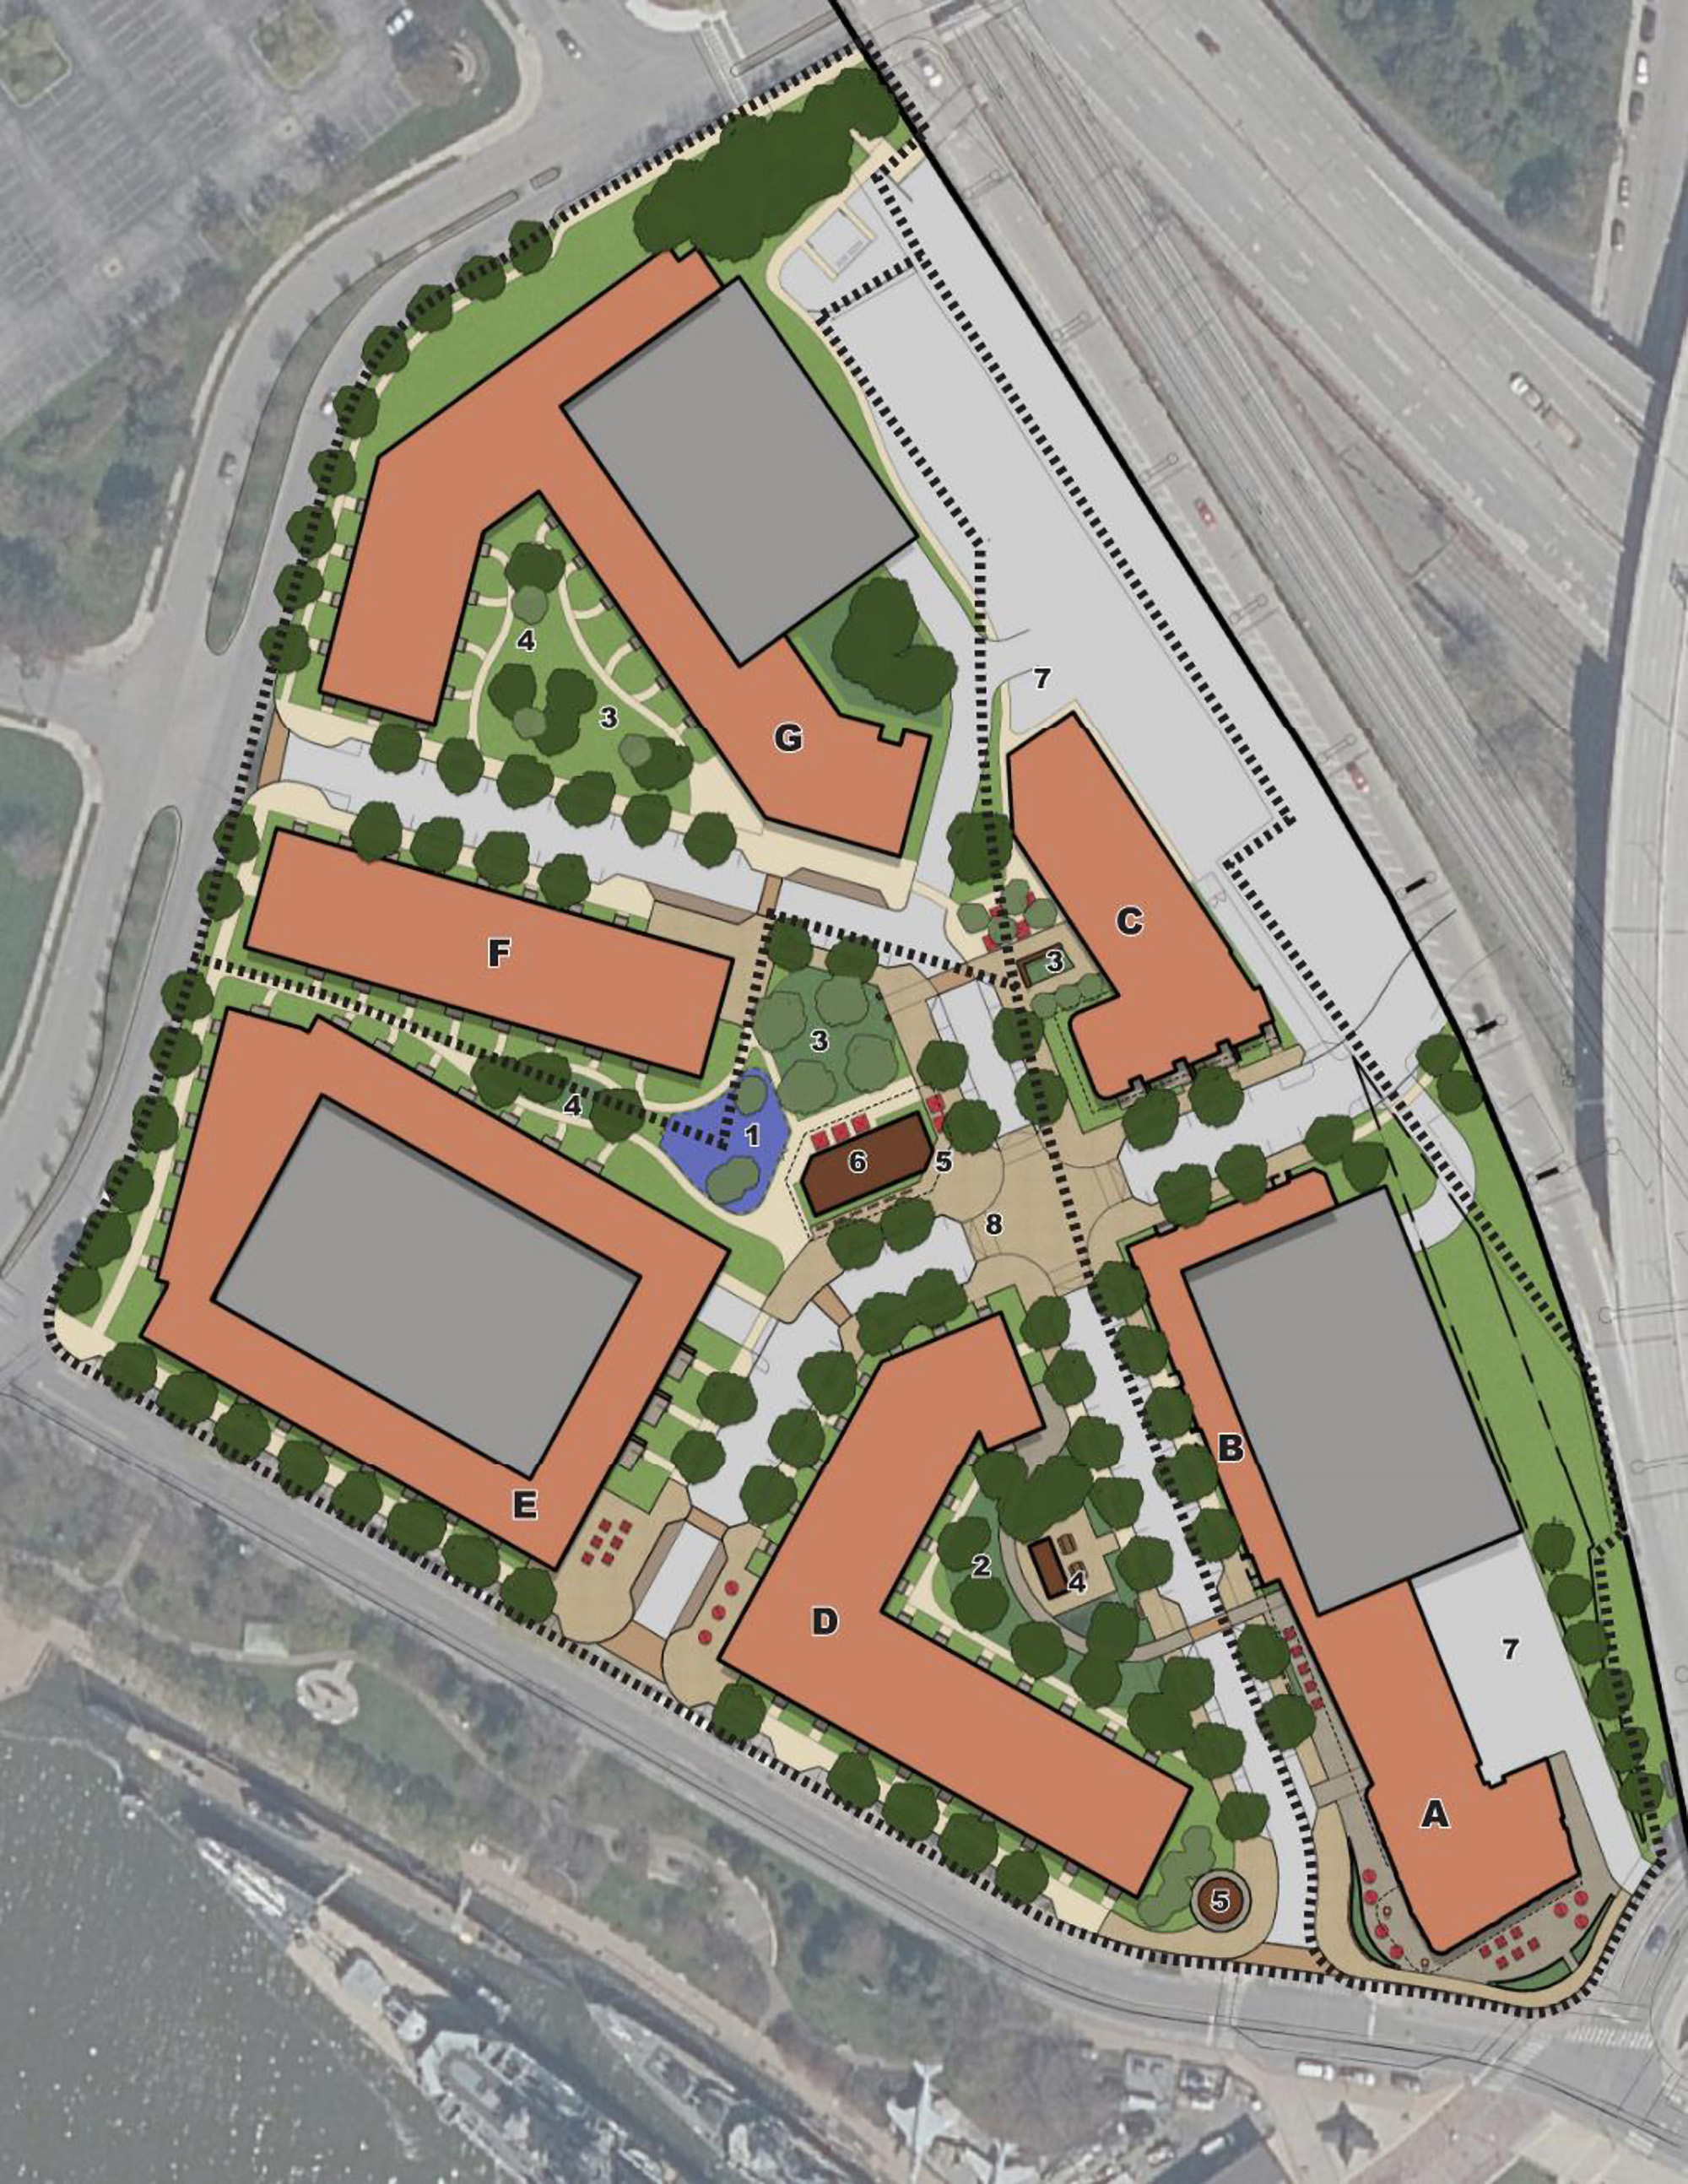 Aerial view of affordable housing redevelopment plans